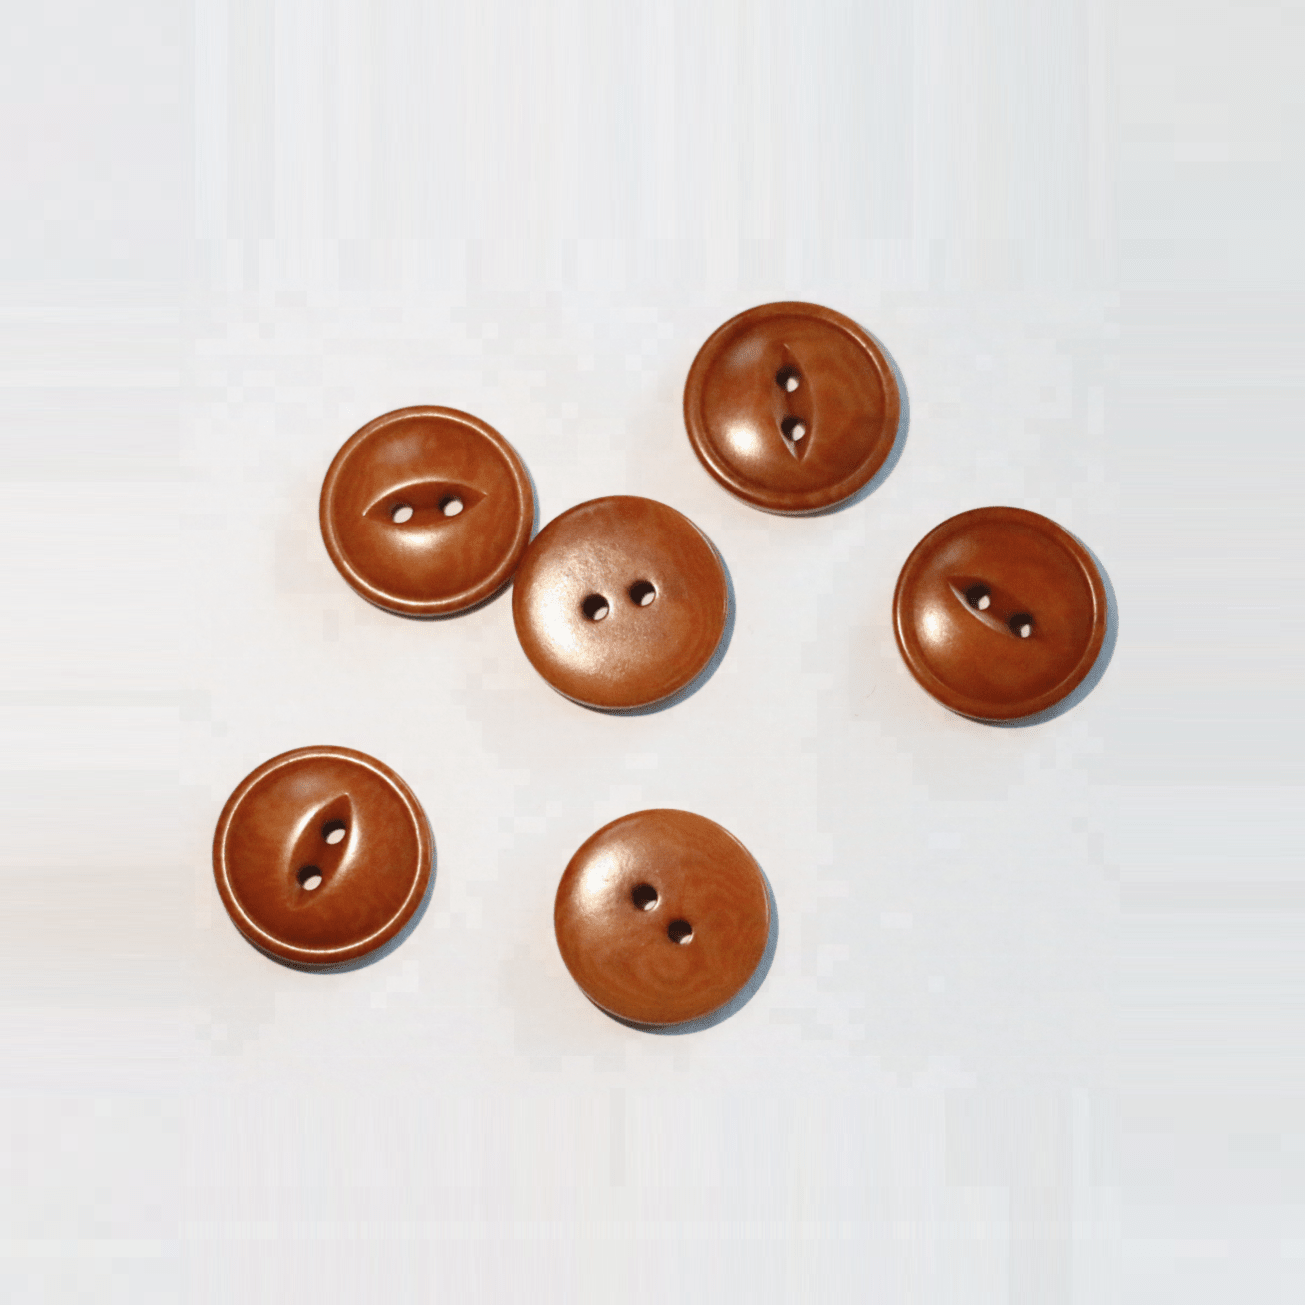 Buffalo Horn Fisnished Buttons 100